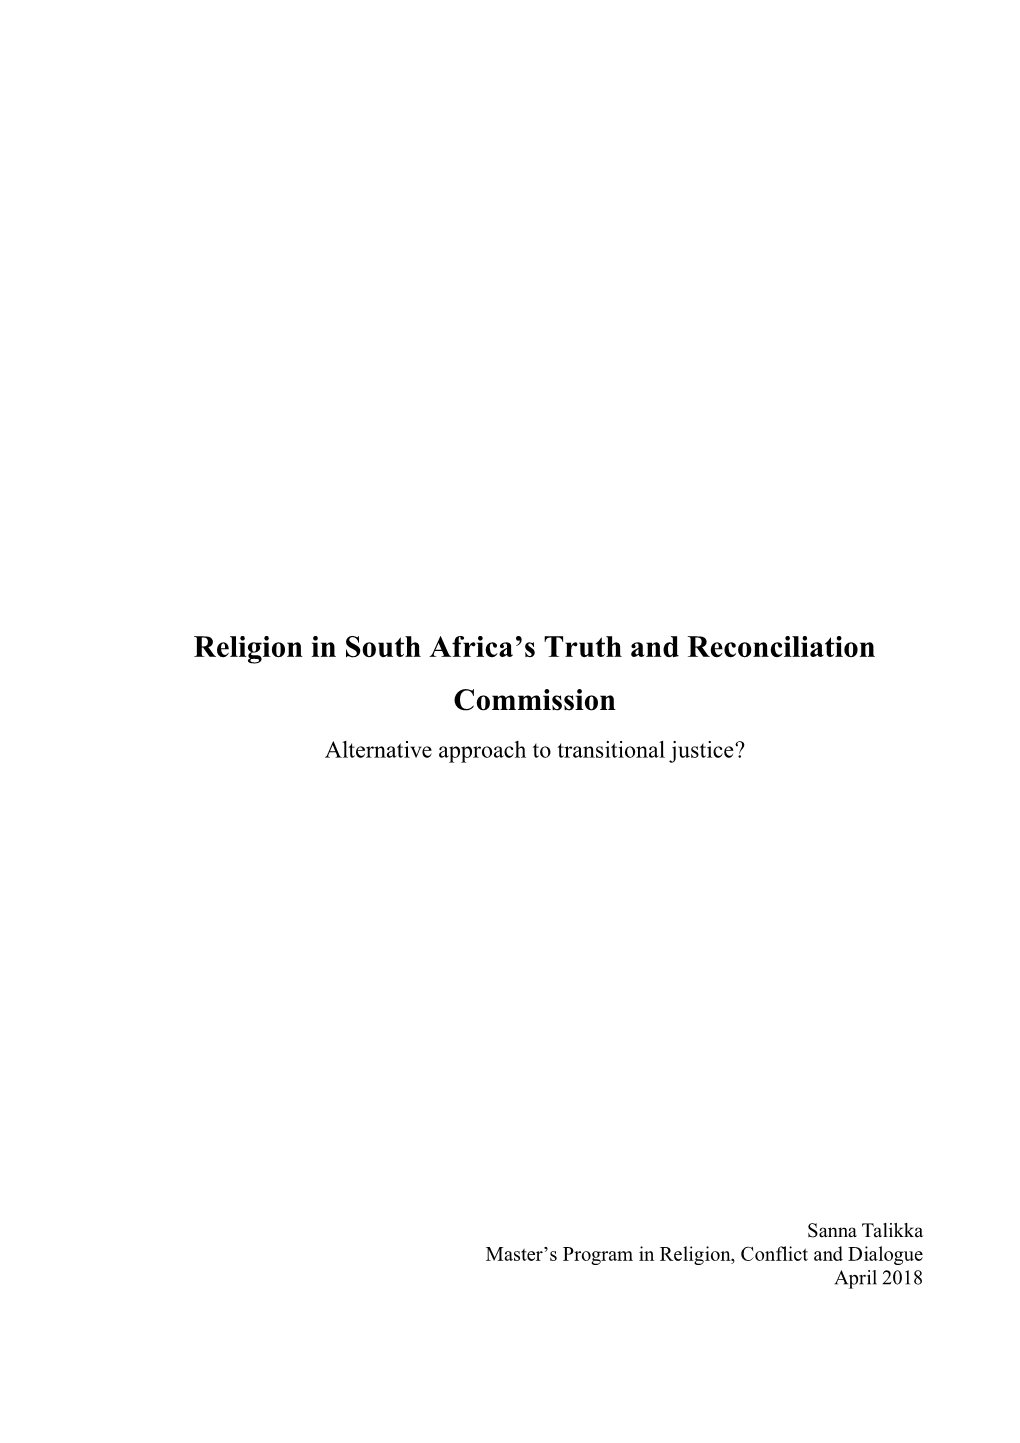 Religion in South Africa's Truth and Reconciliation Commission